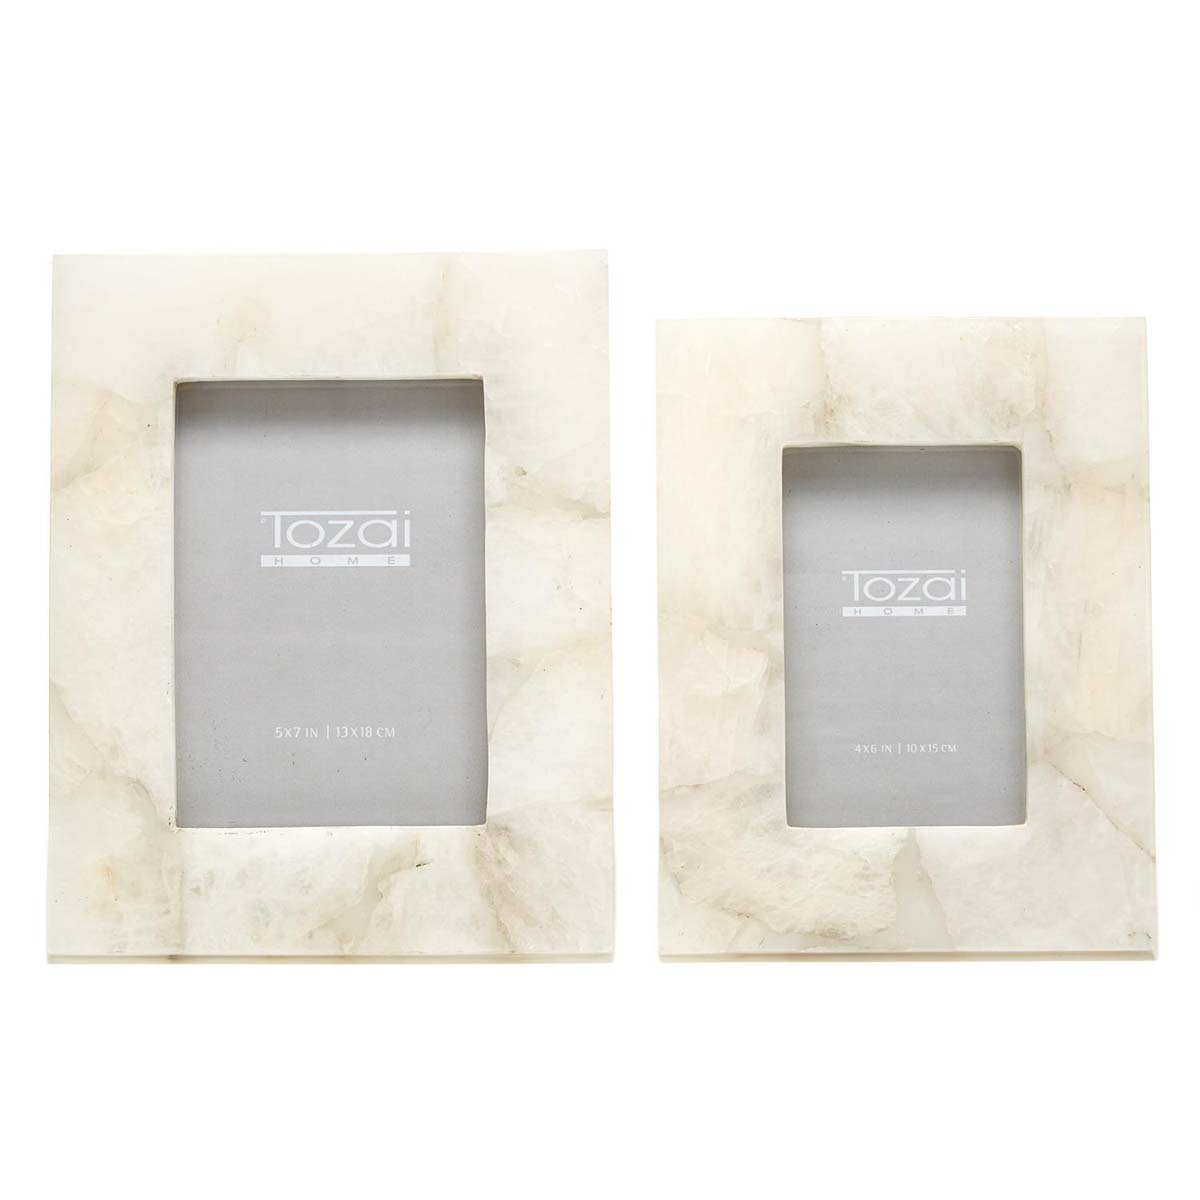 Two's Company White Quartz Photo Frames in Gift Box (includes 2 Sizes: 4 x 6 and 5 x 7)